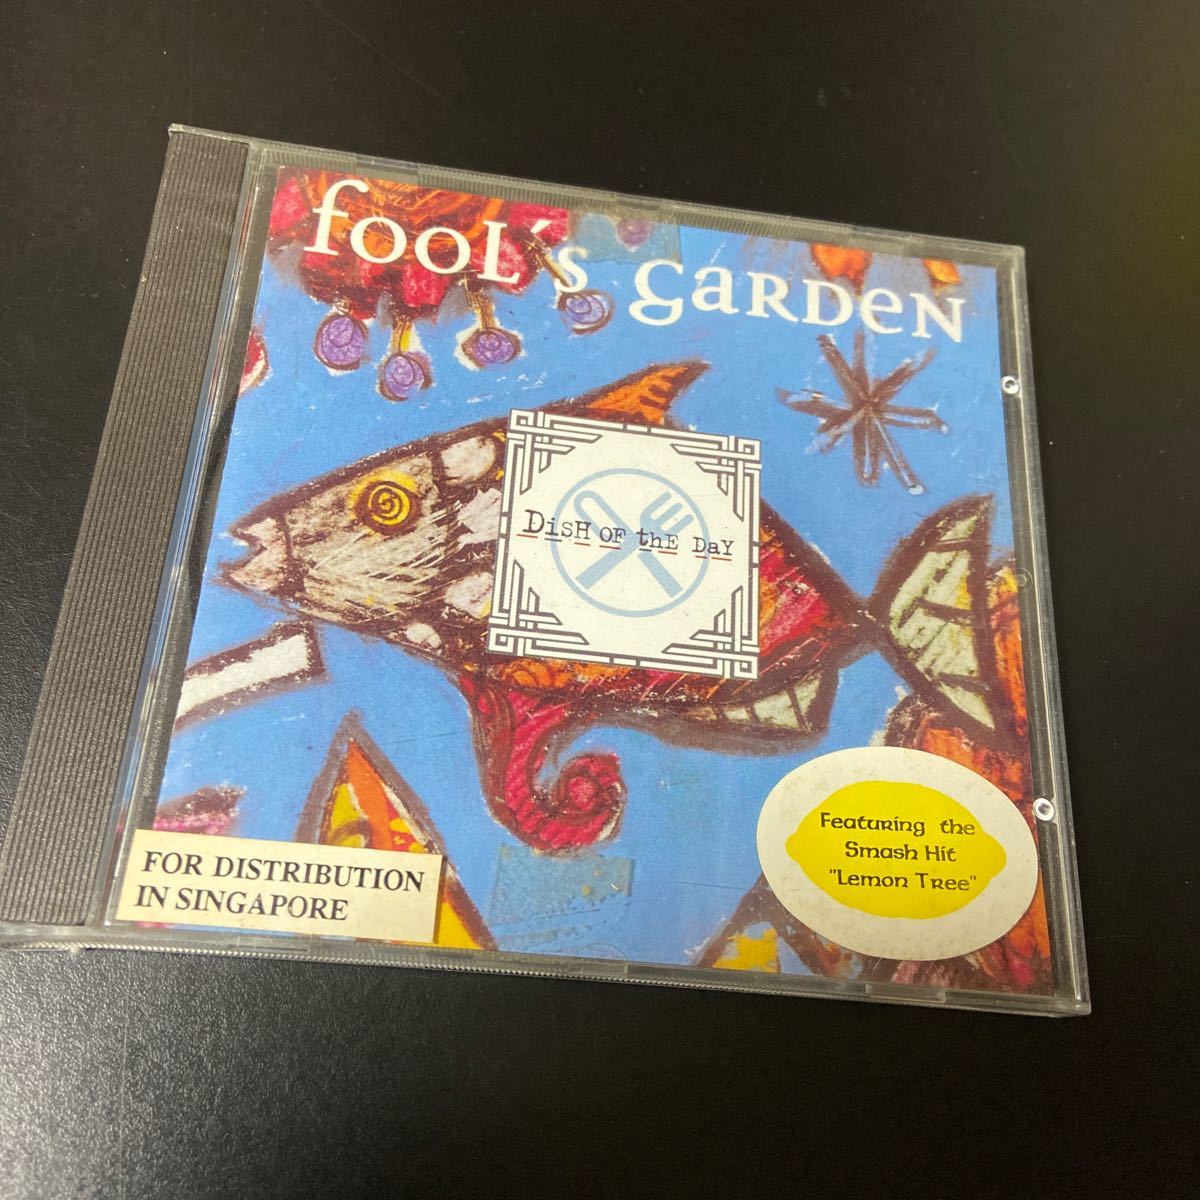 Dish of the day/ fool's garden CD distribution in Singapore オランダ製